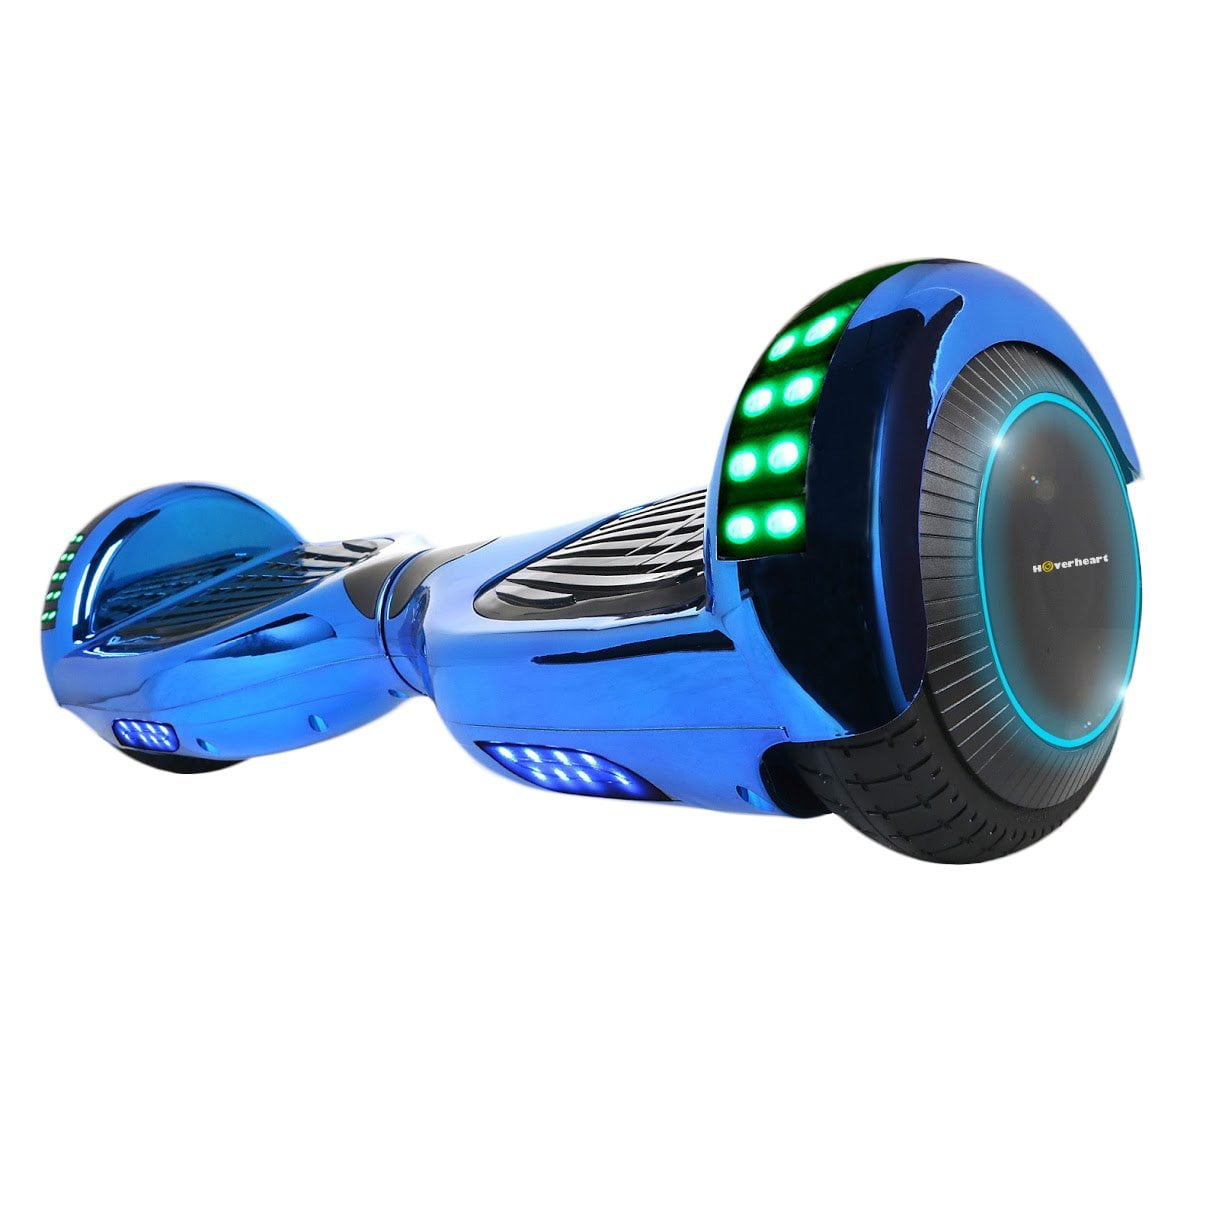 6.5'' Hoover board Two LED Flash Wheels Balance Electric Scooter Chrome US 